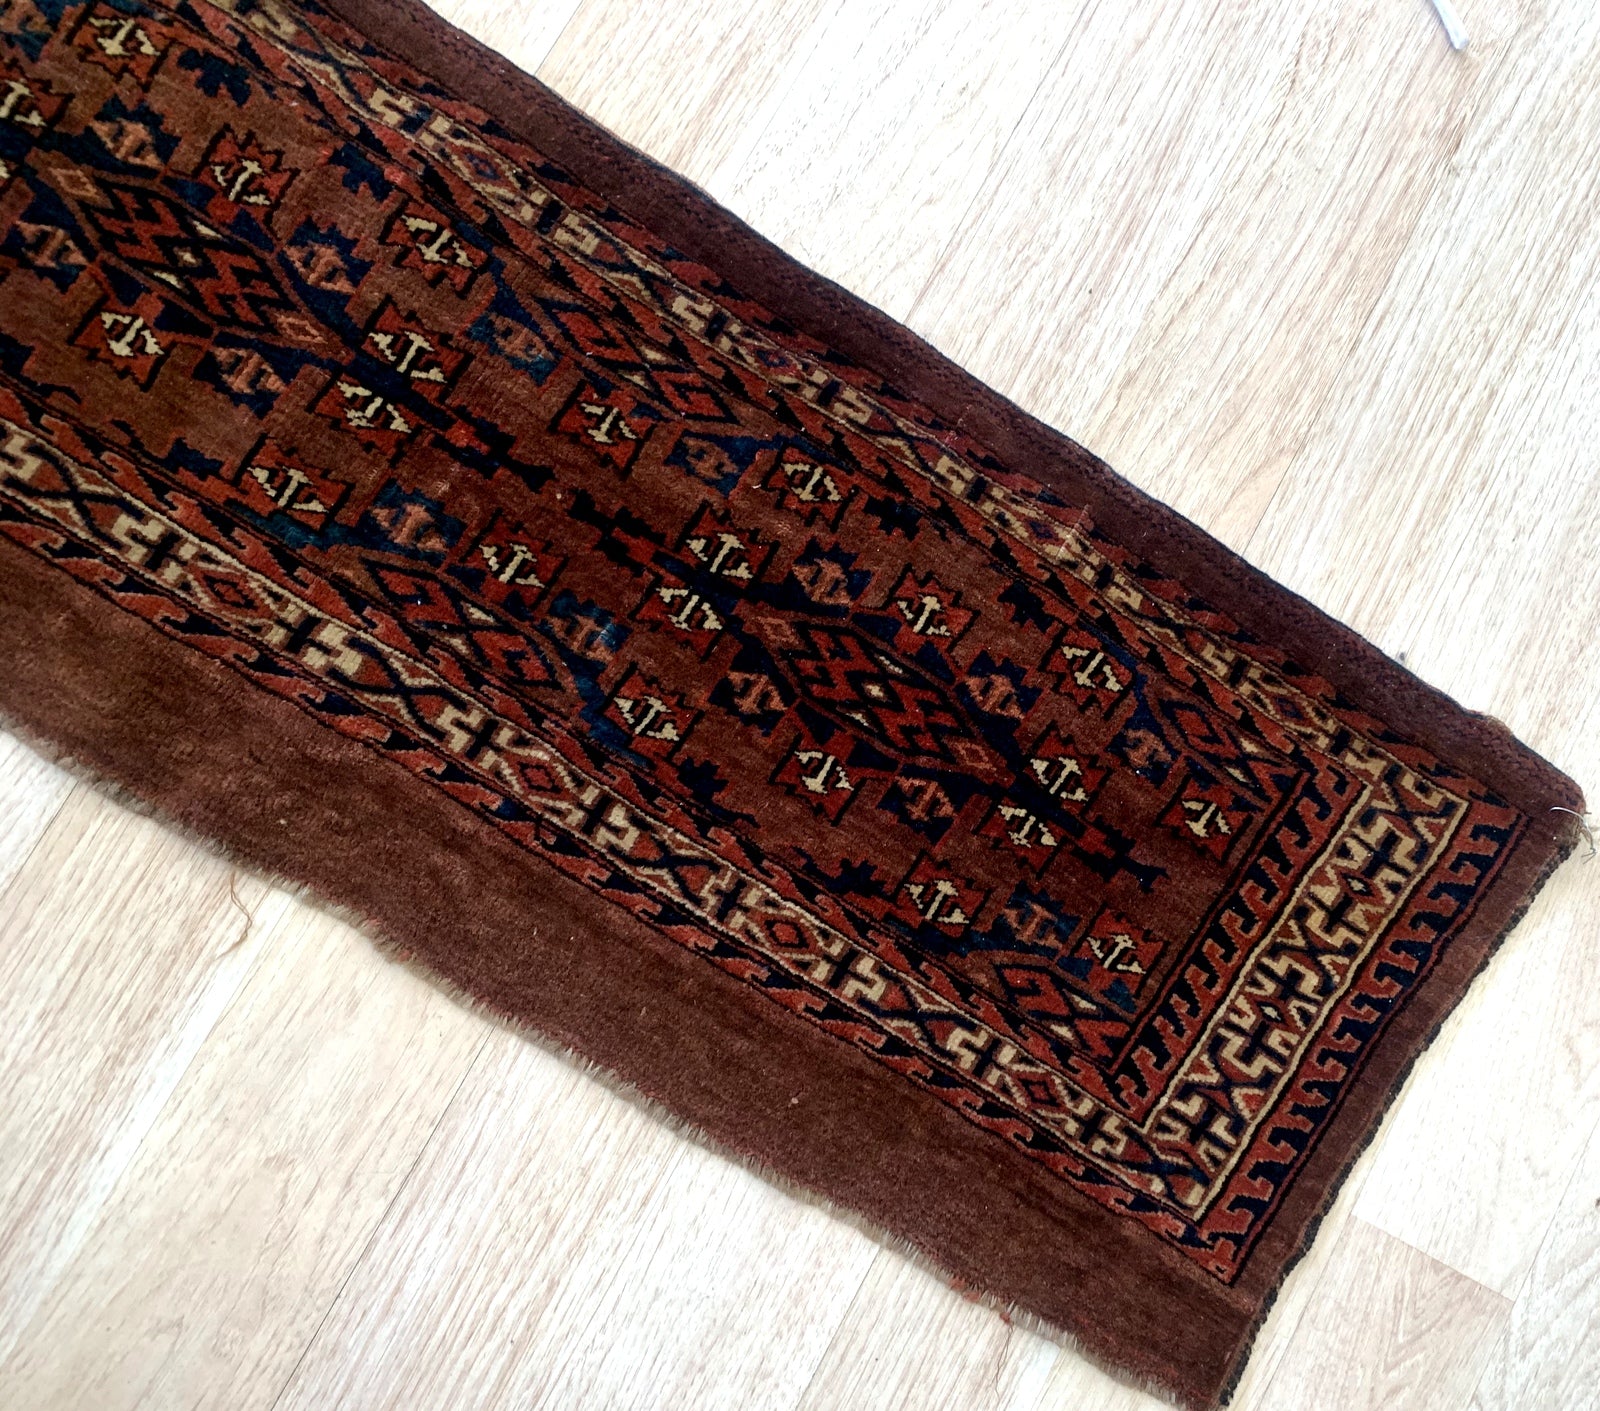 Handmade antique Turkmen Yomud torba in original good condition. The rug has been made in the end of 19th century in Turkmenistan. All dyes on the rug are natural. This rug is collectible piece.